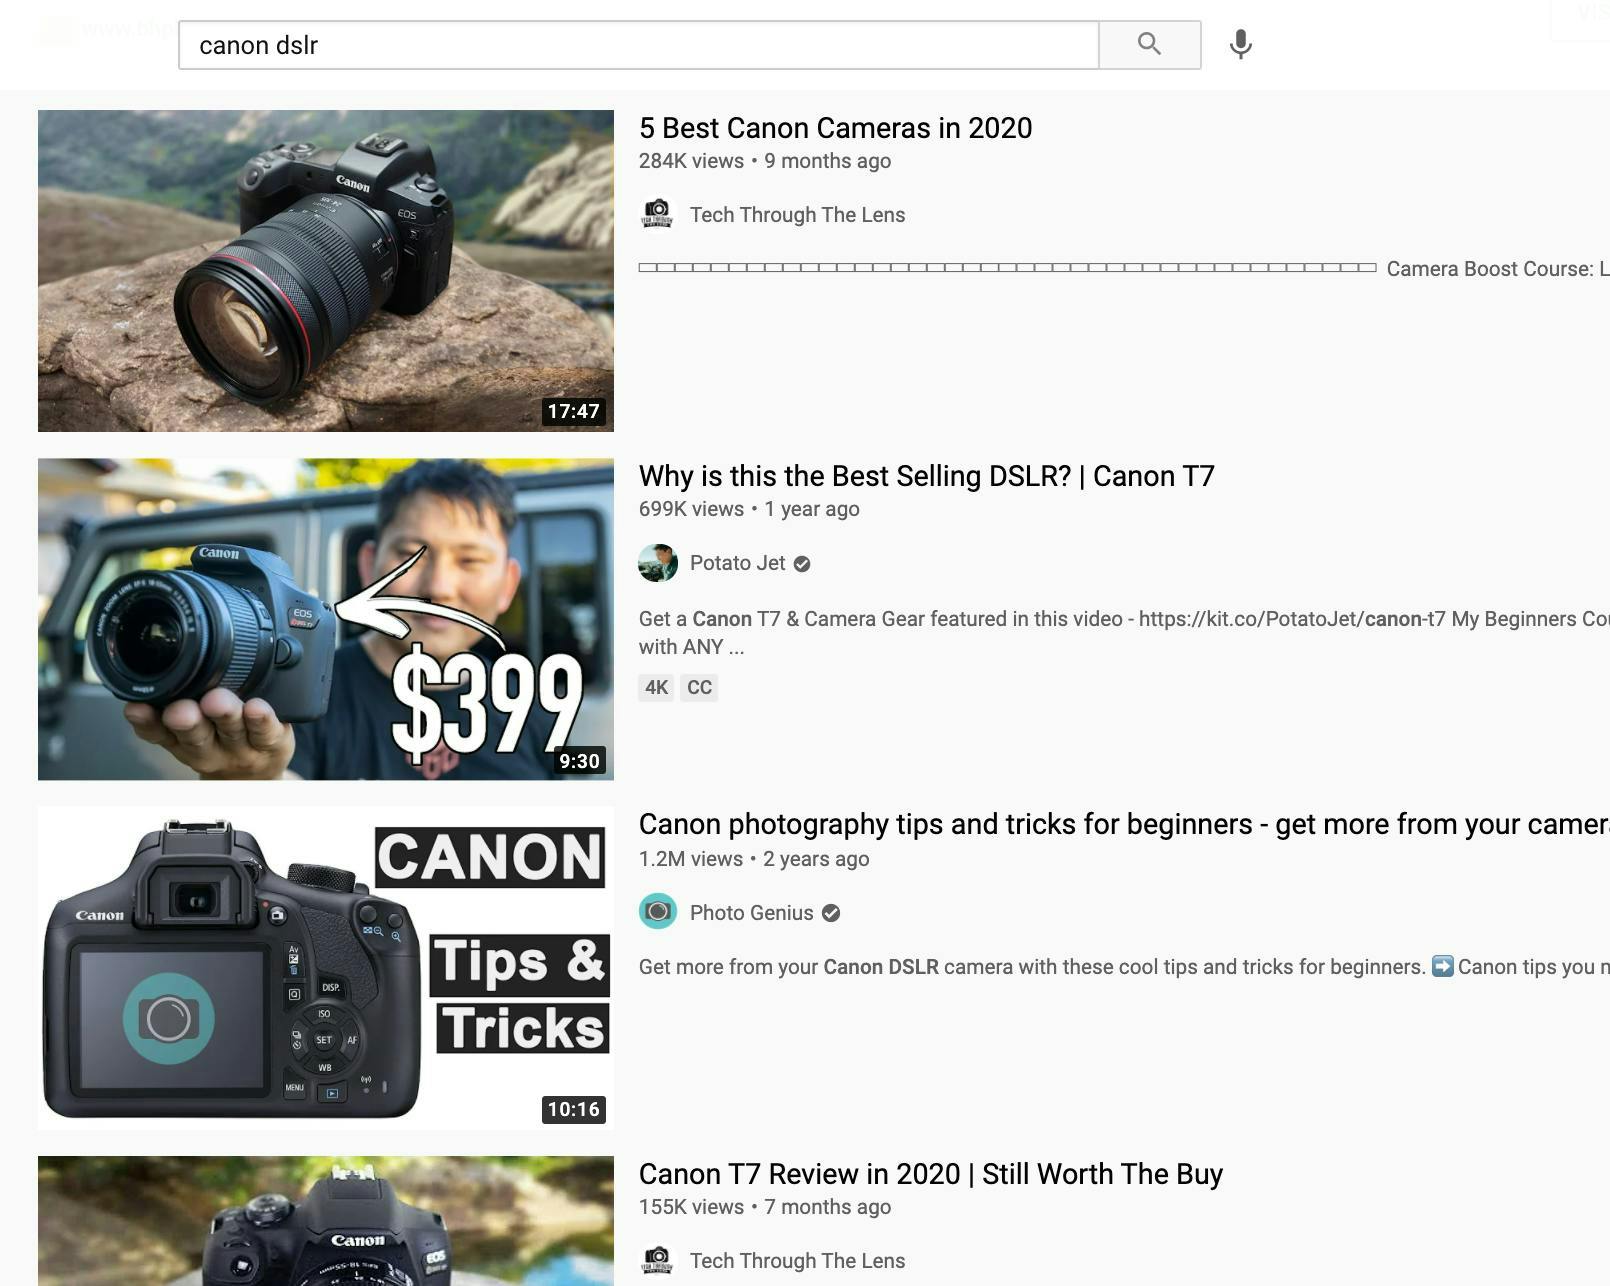 Search results for DSLR cameras on YouTube showing 4 videos from different channels